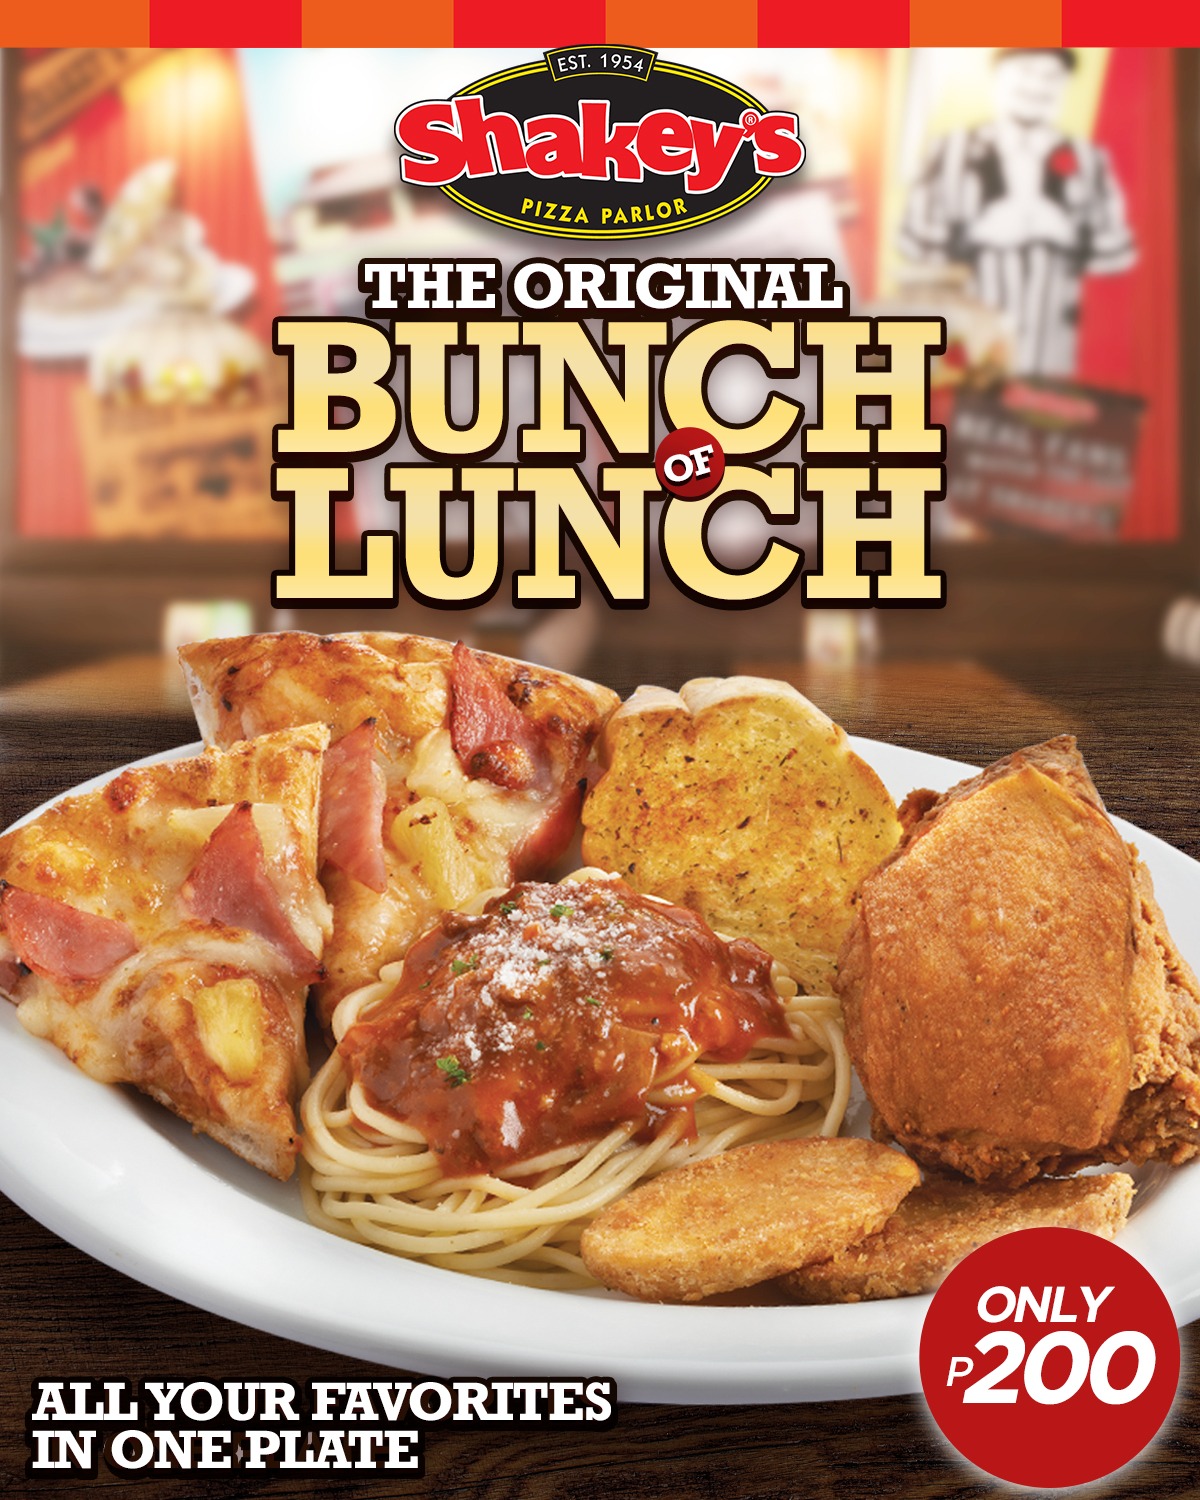 Shakey's Bunch of Lunch